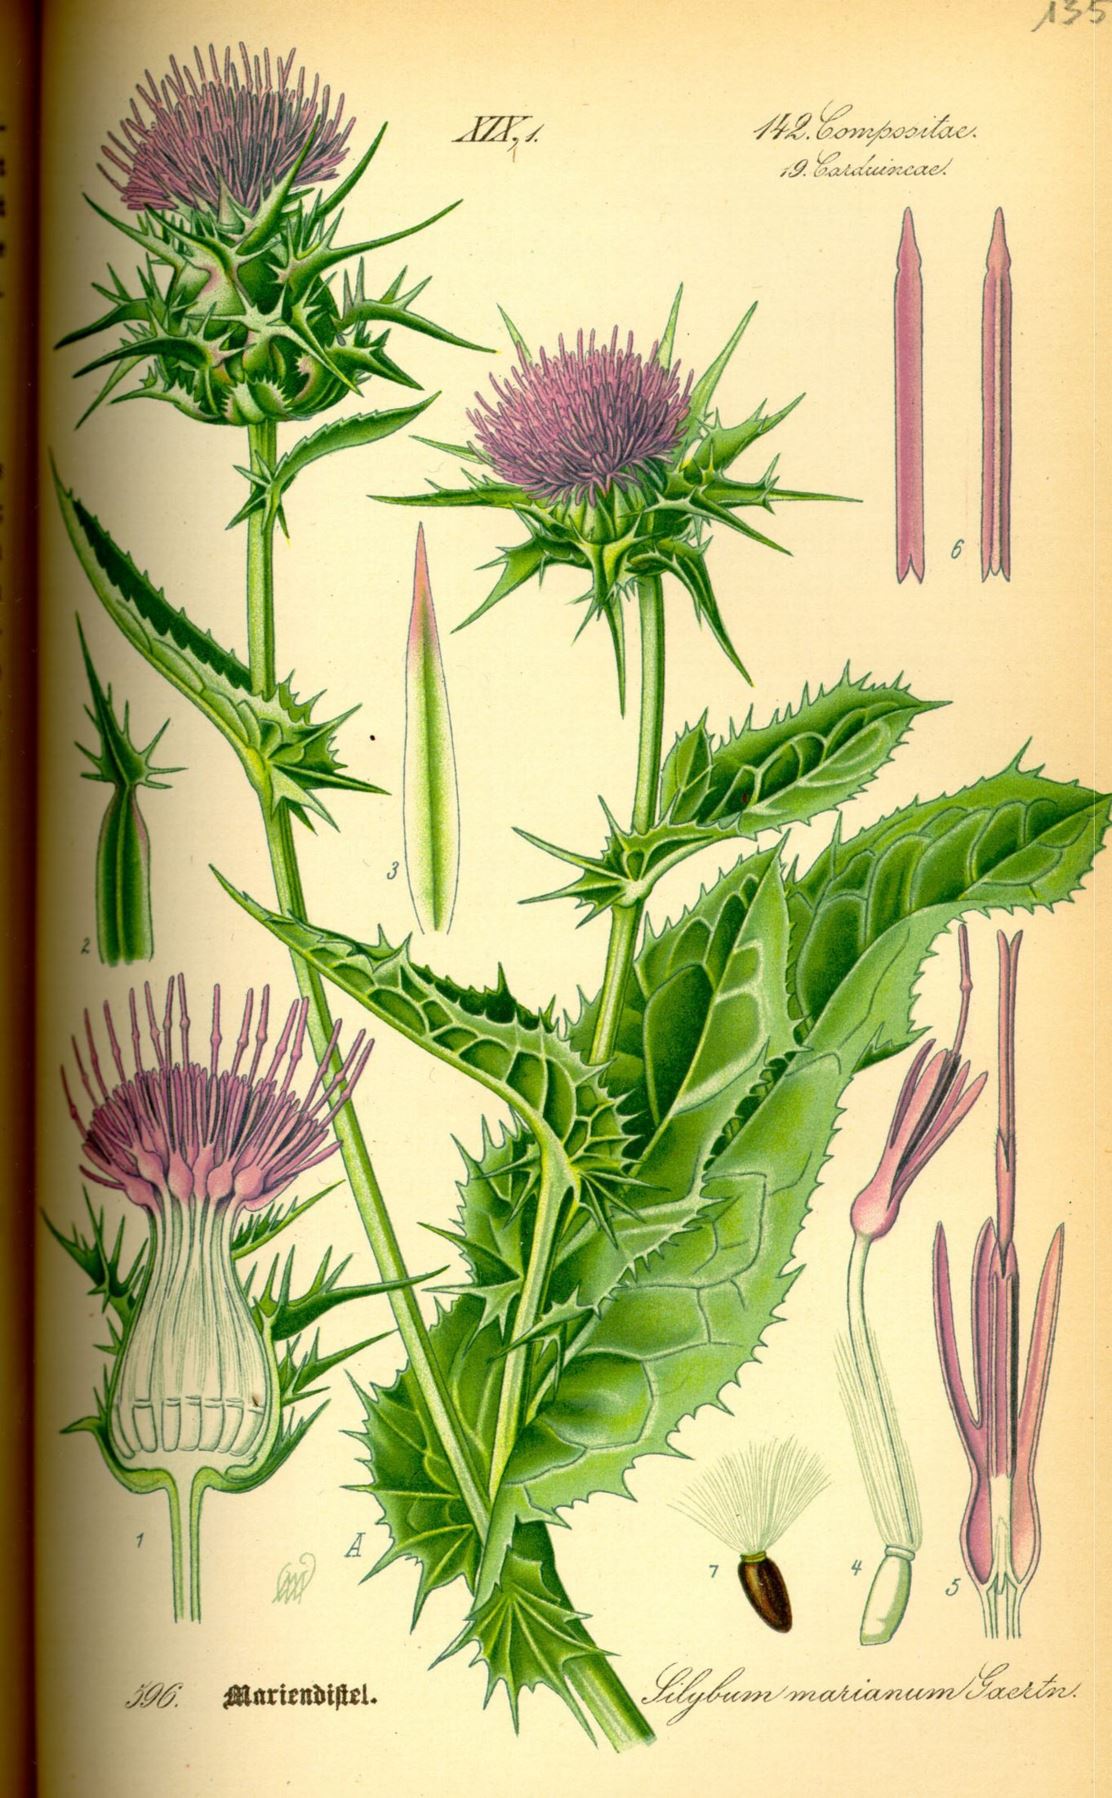 Silybum marianum - Mariadistel, Blessed thistle, Holy thistle, Our Lady's milk thistle